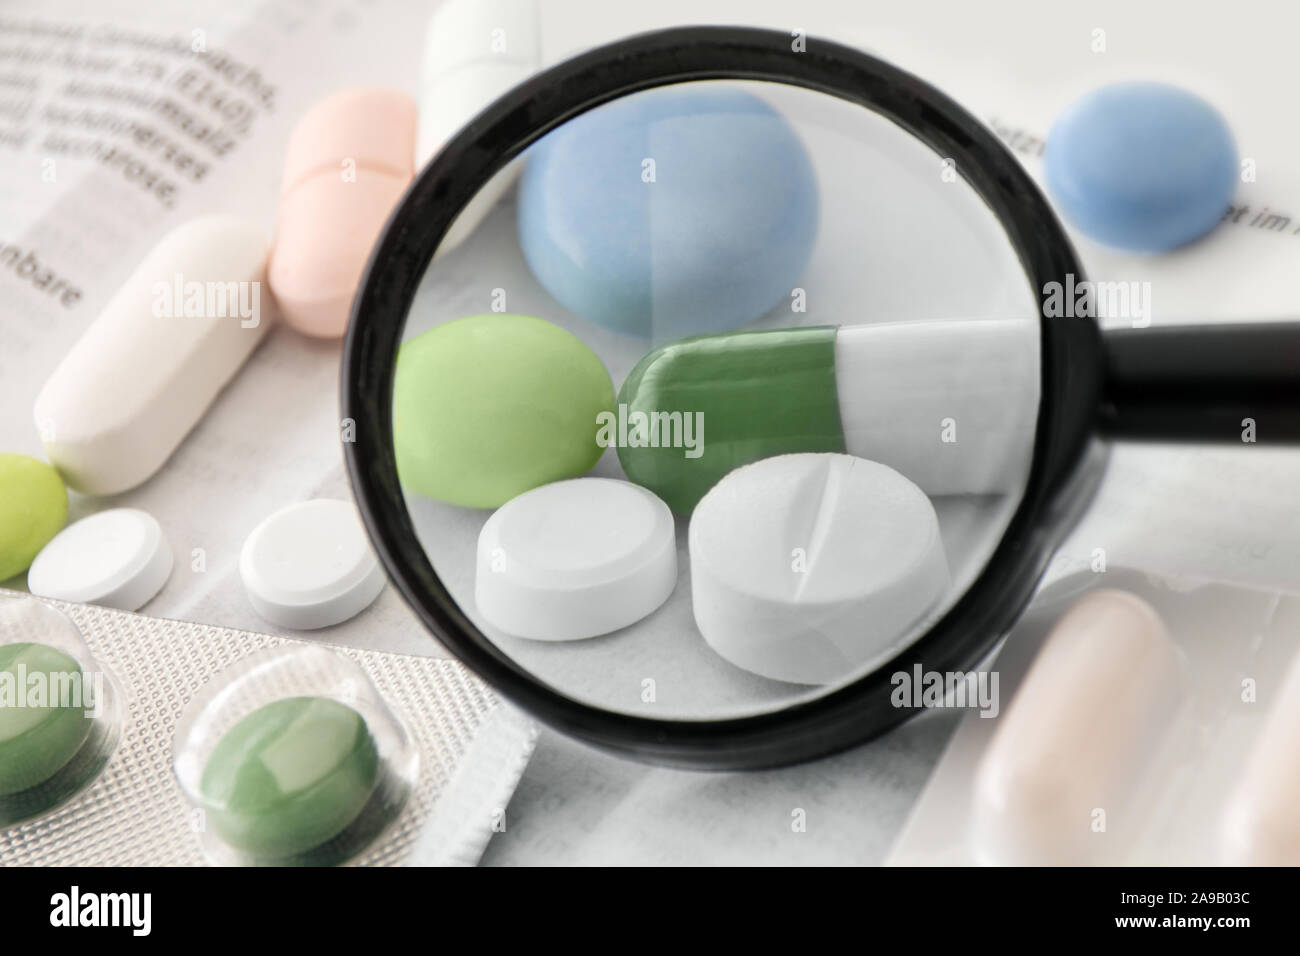 Medicaments and German package insert Stock Photo